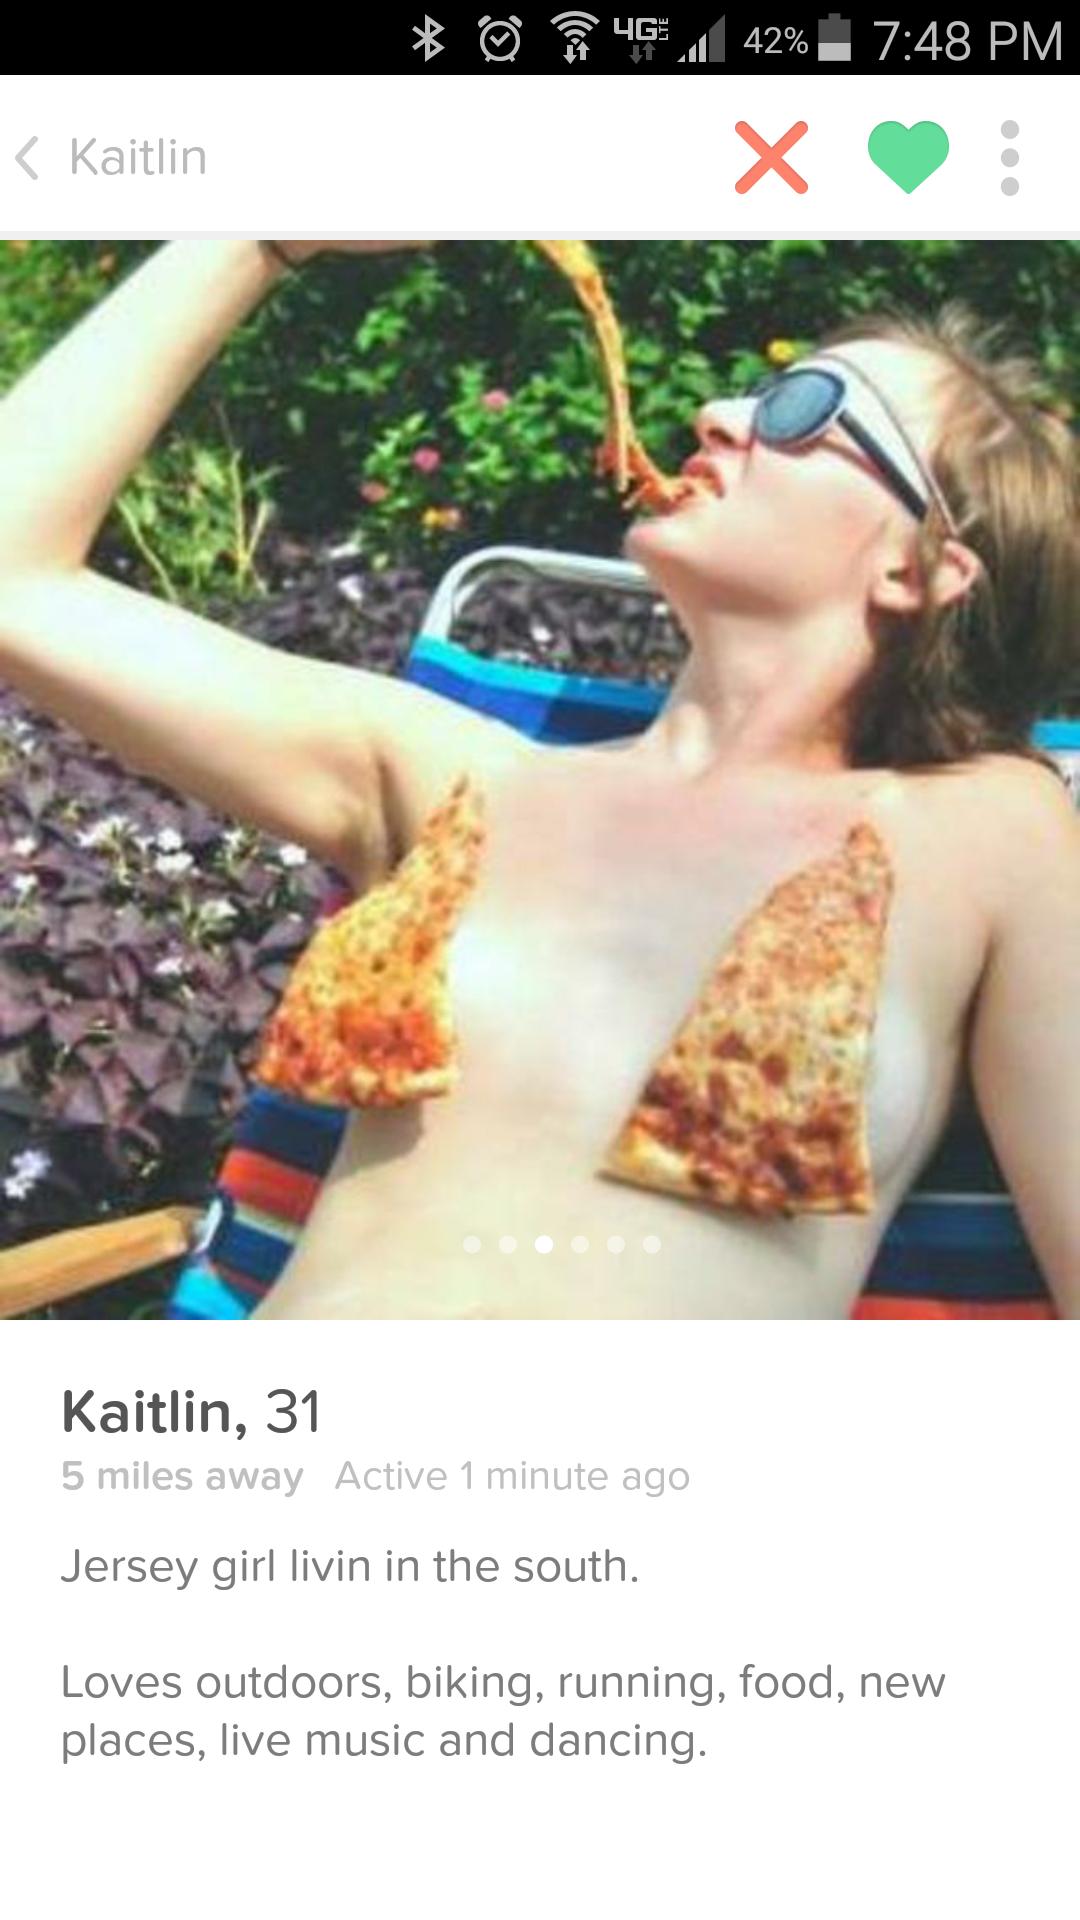 tinder - without food in comments - 0 46, 42% s Kaitlin Kaitlin, 31 5 miles away Active 1 minute ago Jersey girl livin in the south. Loves outdoors, biking, running, food, new places, live music and dancing.